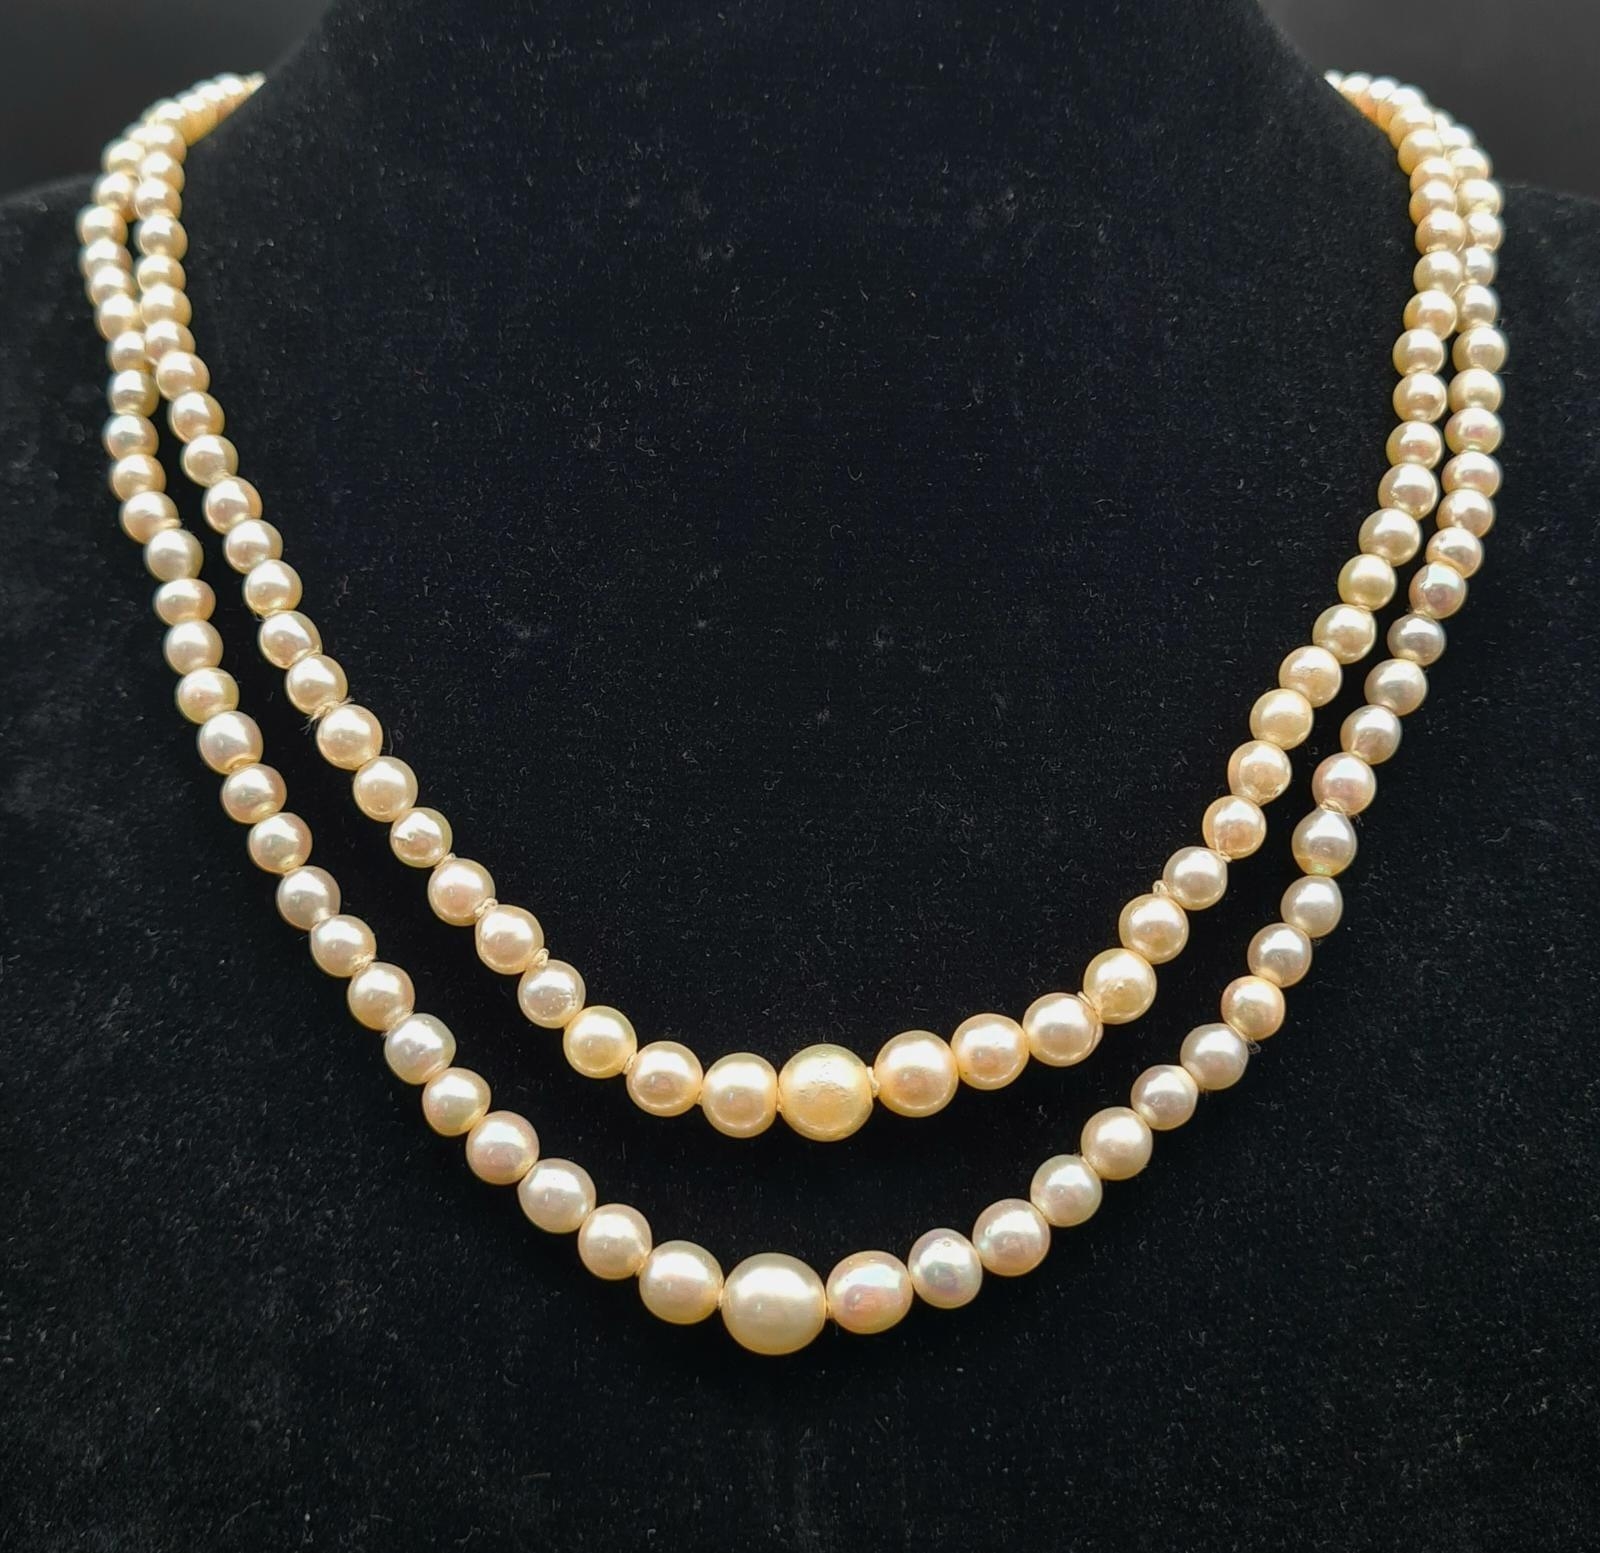 A Vintage Double Strand Graduated Pearl Necklace with White Stone Clasp. 40cm.